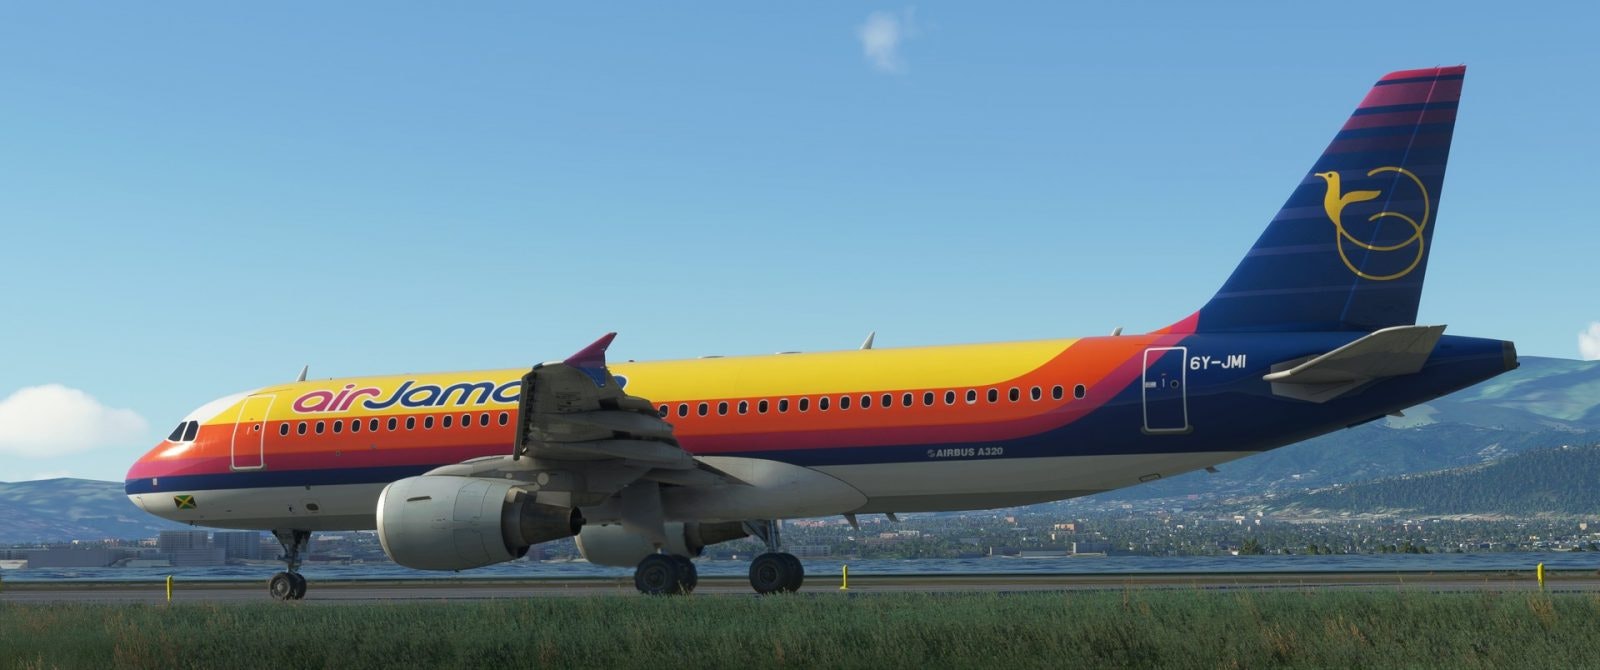 Fenix A320 Development Update: Performance, CDPLC and New Livery Previews